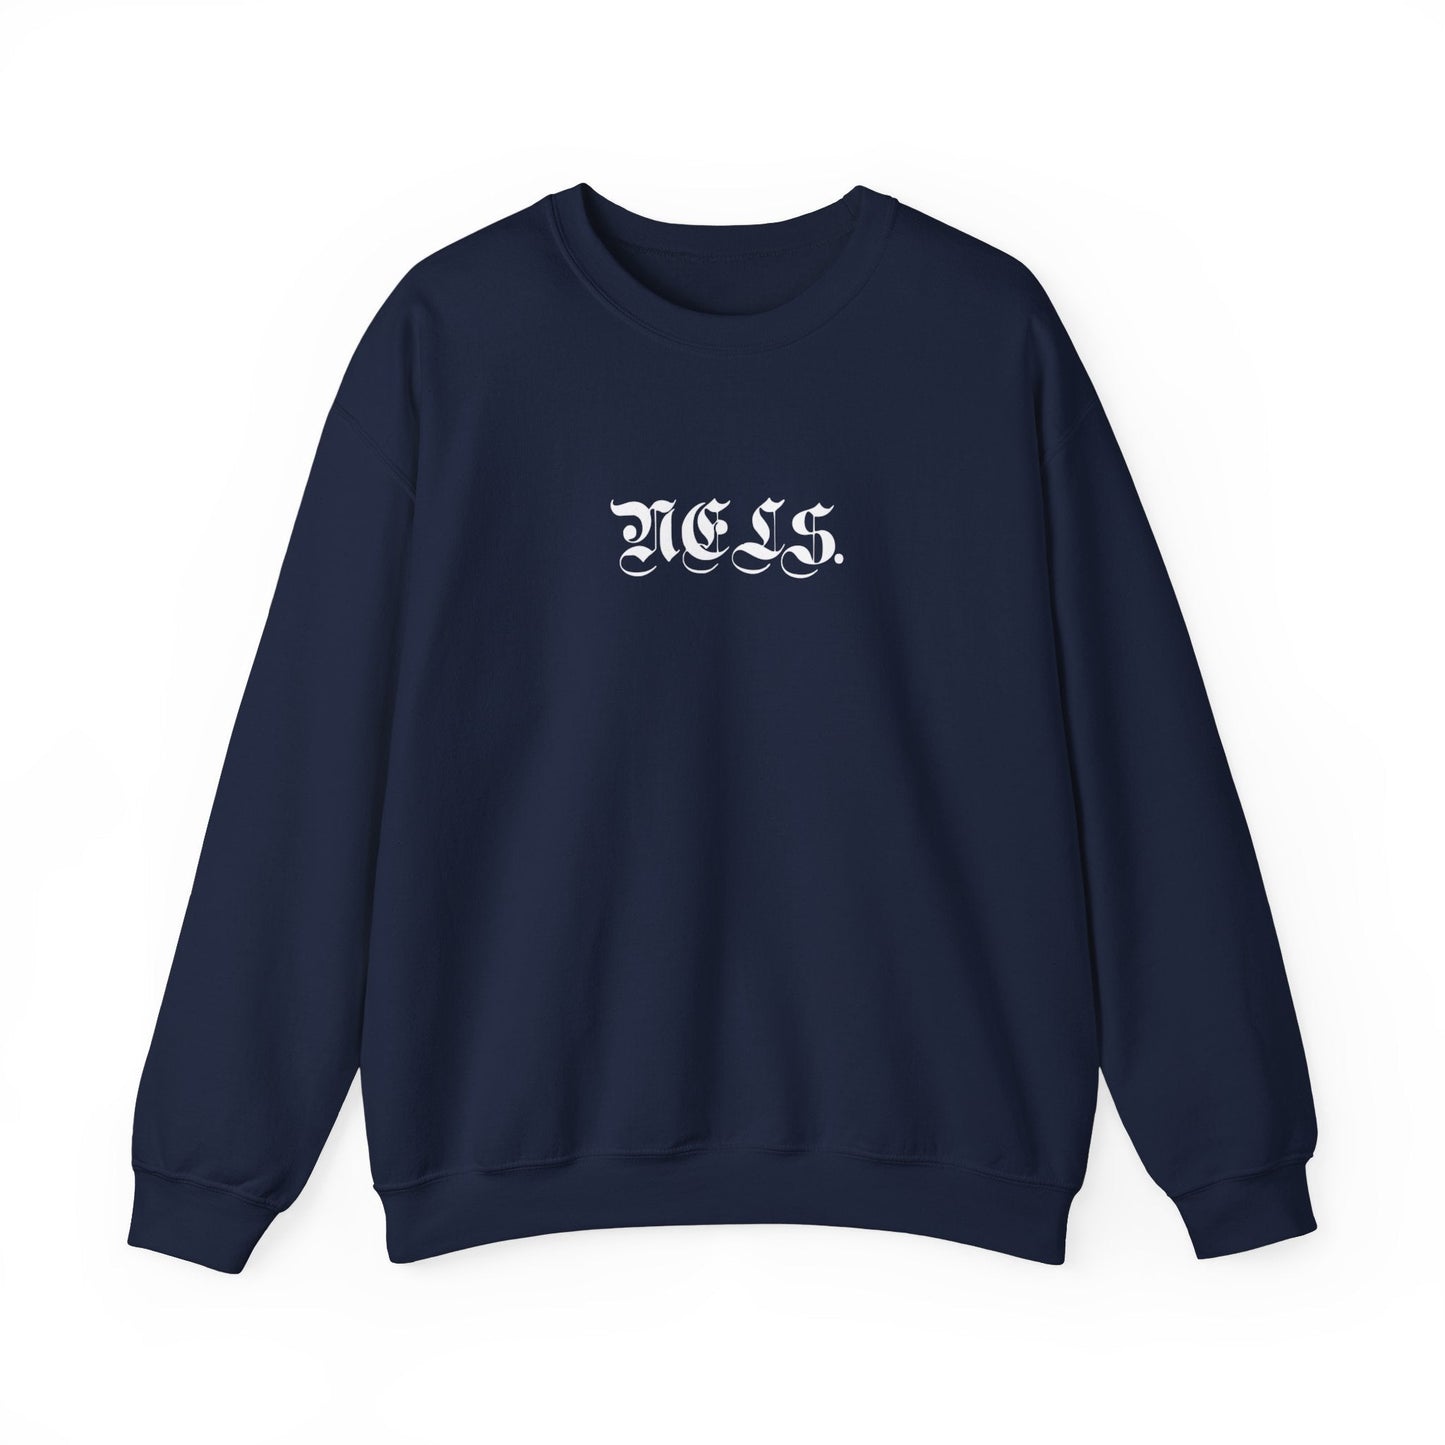 Sweatshirt NELS. Live Life In Full Bloom Front and Back - NELS.